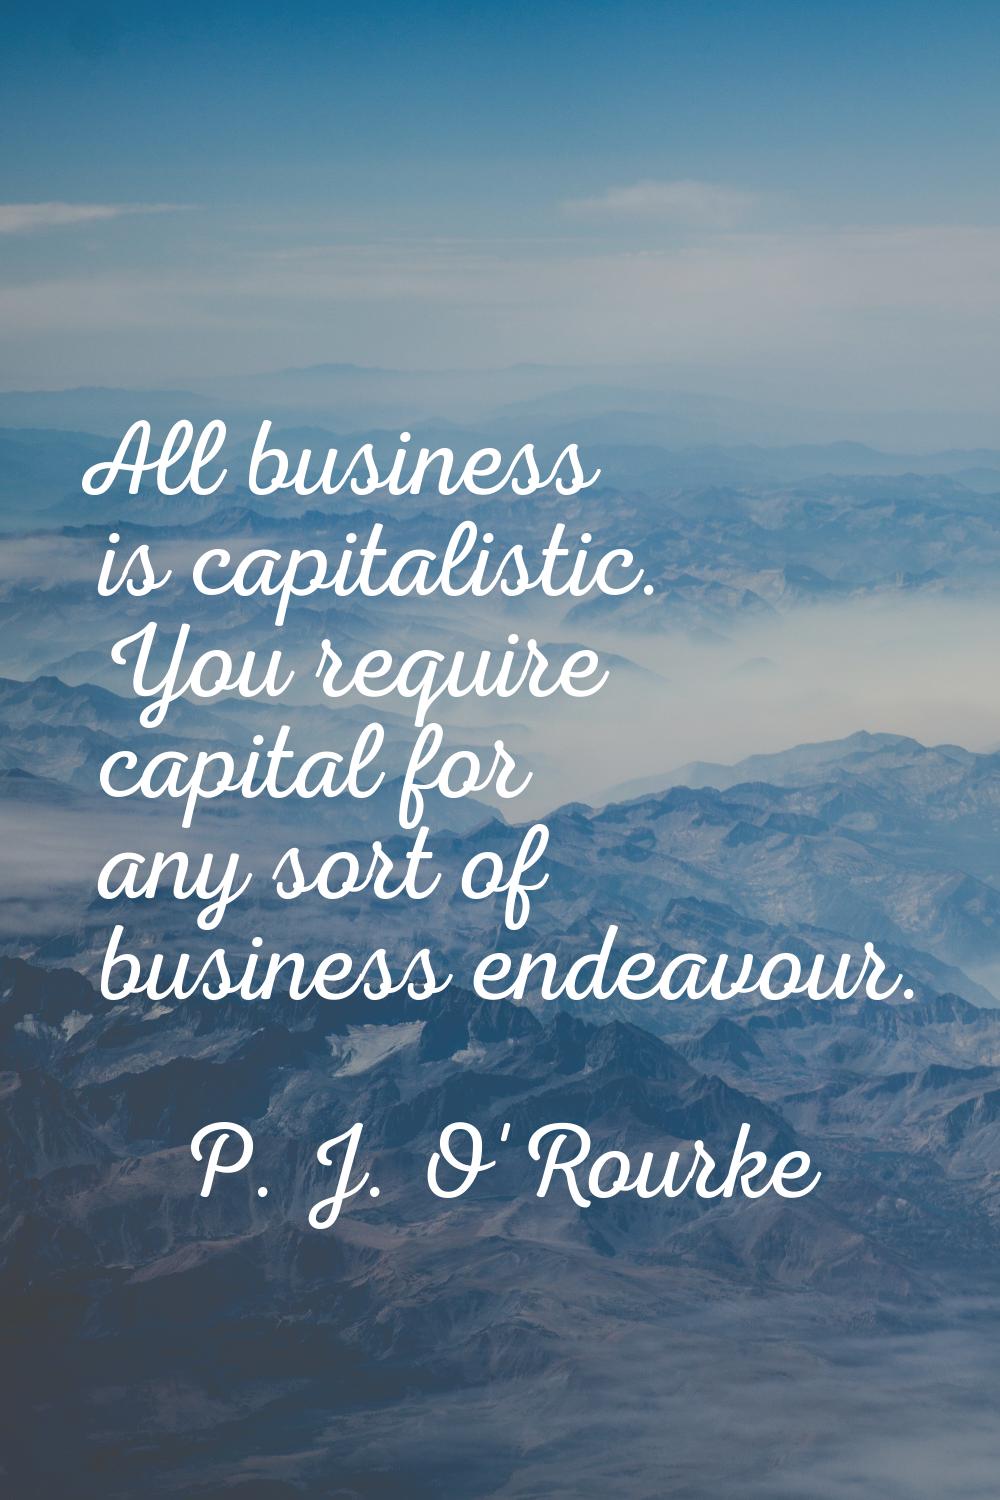 All business is capitalistic. You require capital for any sort of business endeavour.